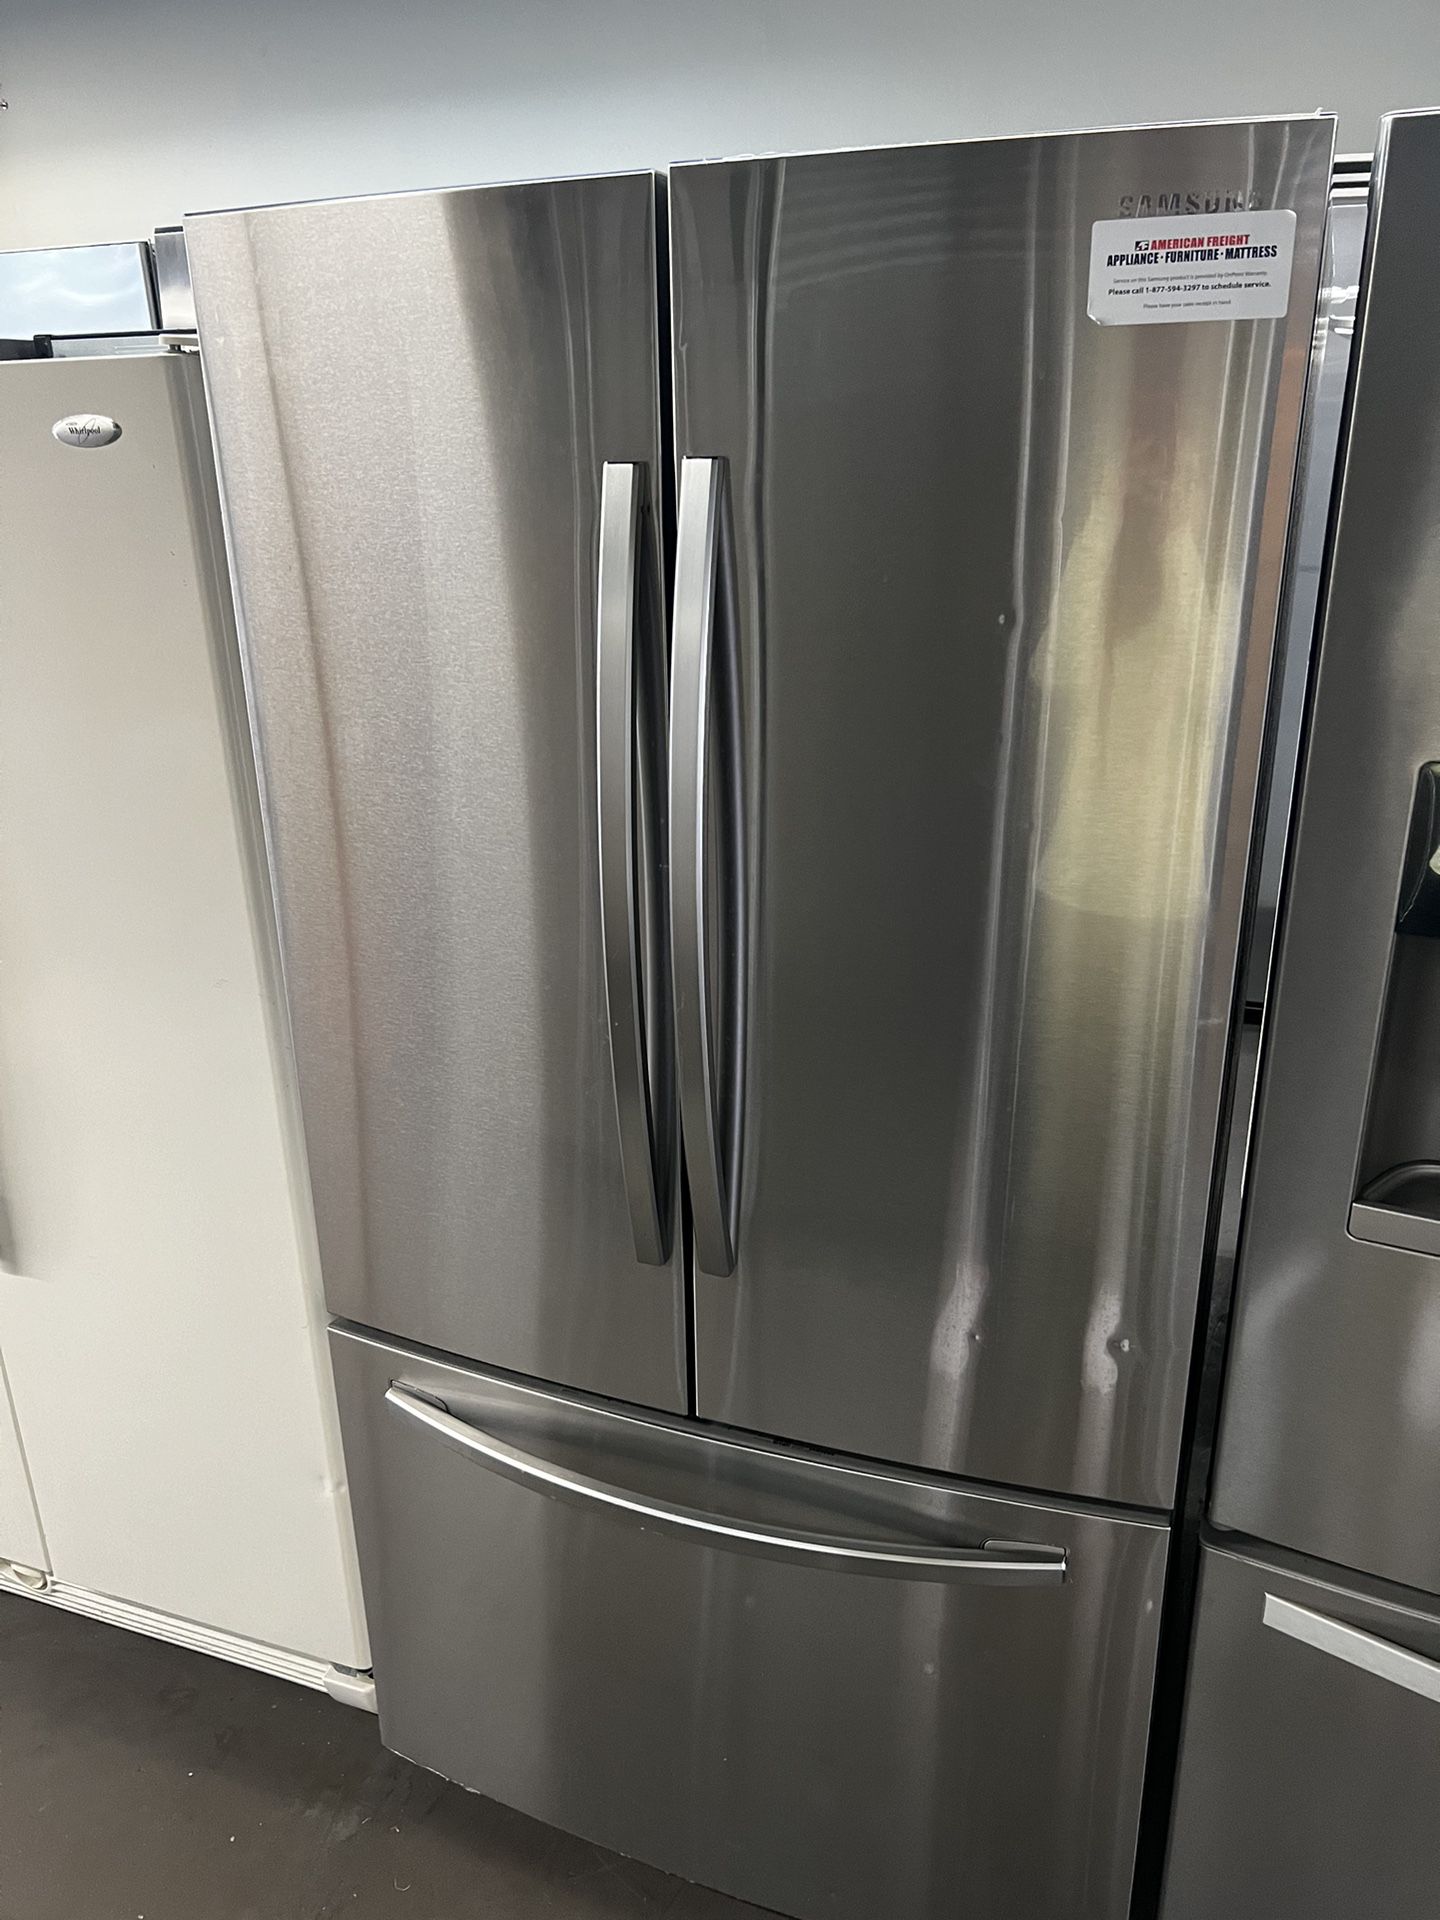 Samsung French Style Refrigerator In Stainless Steel With ice Maker